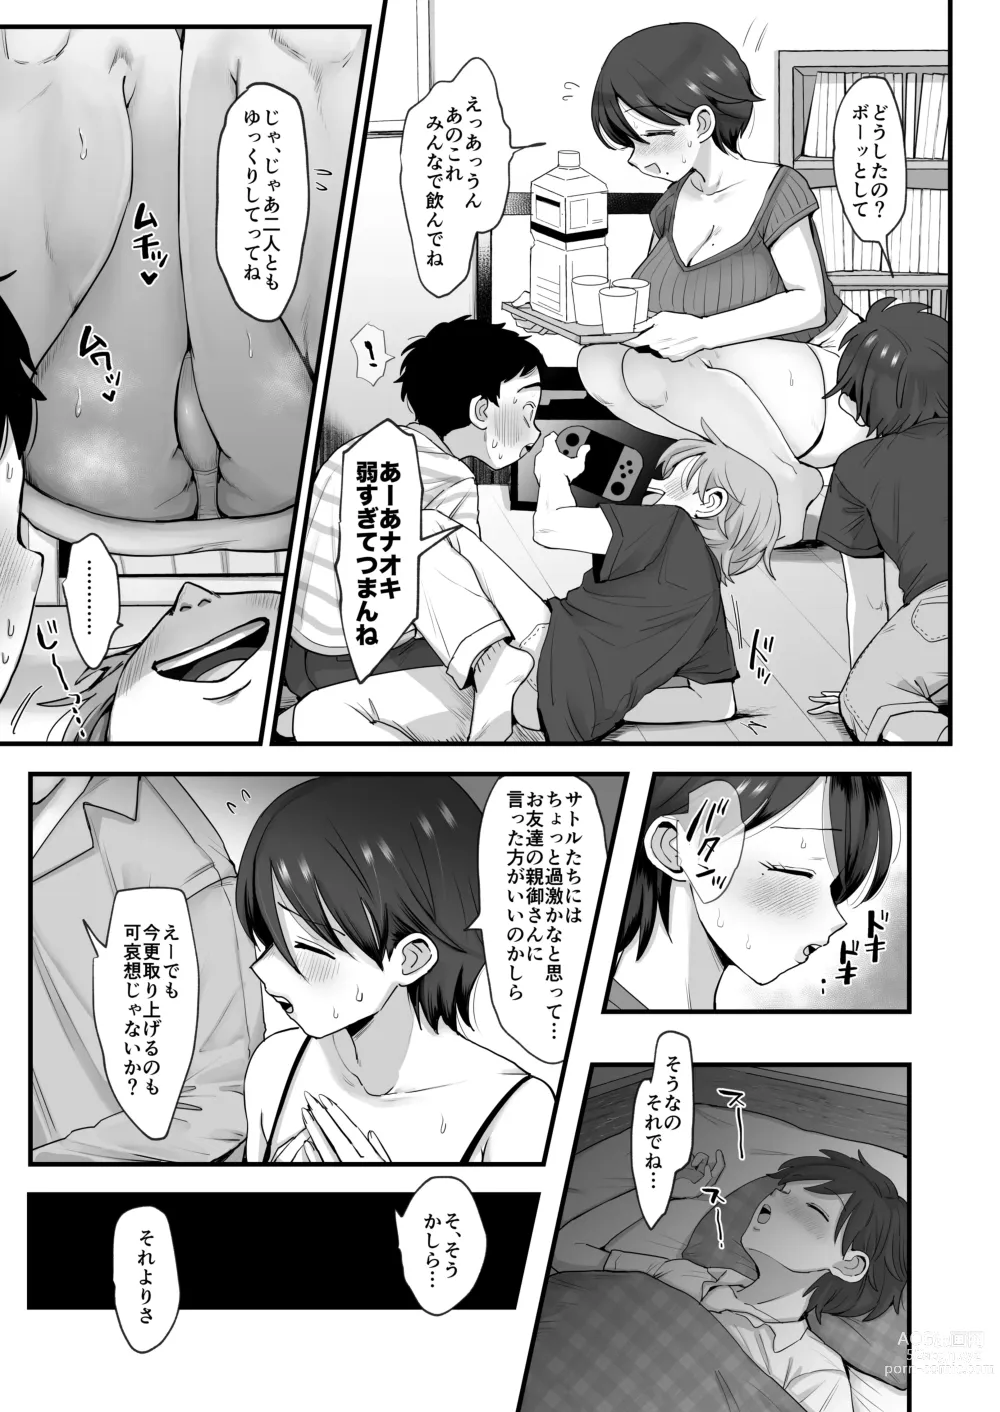 Page 9 of doujinshi Gentle, Busty, Narrow Eyed Momma.